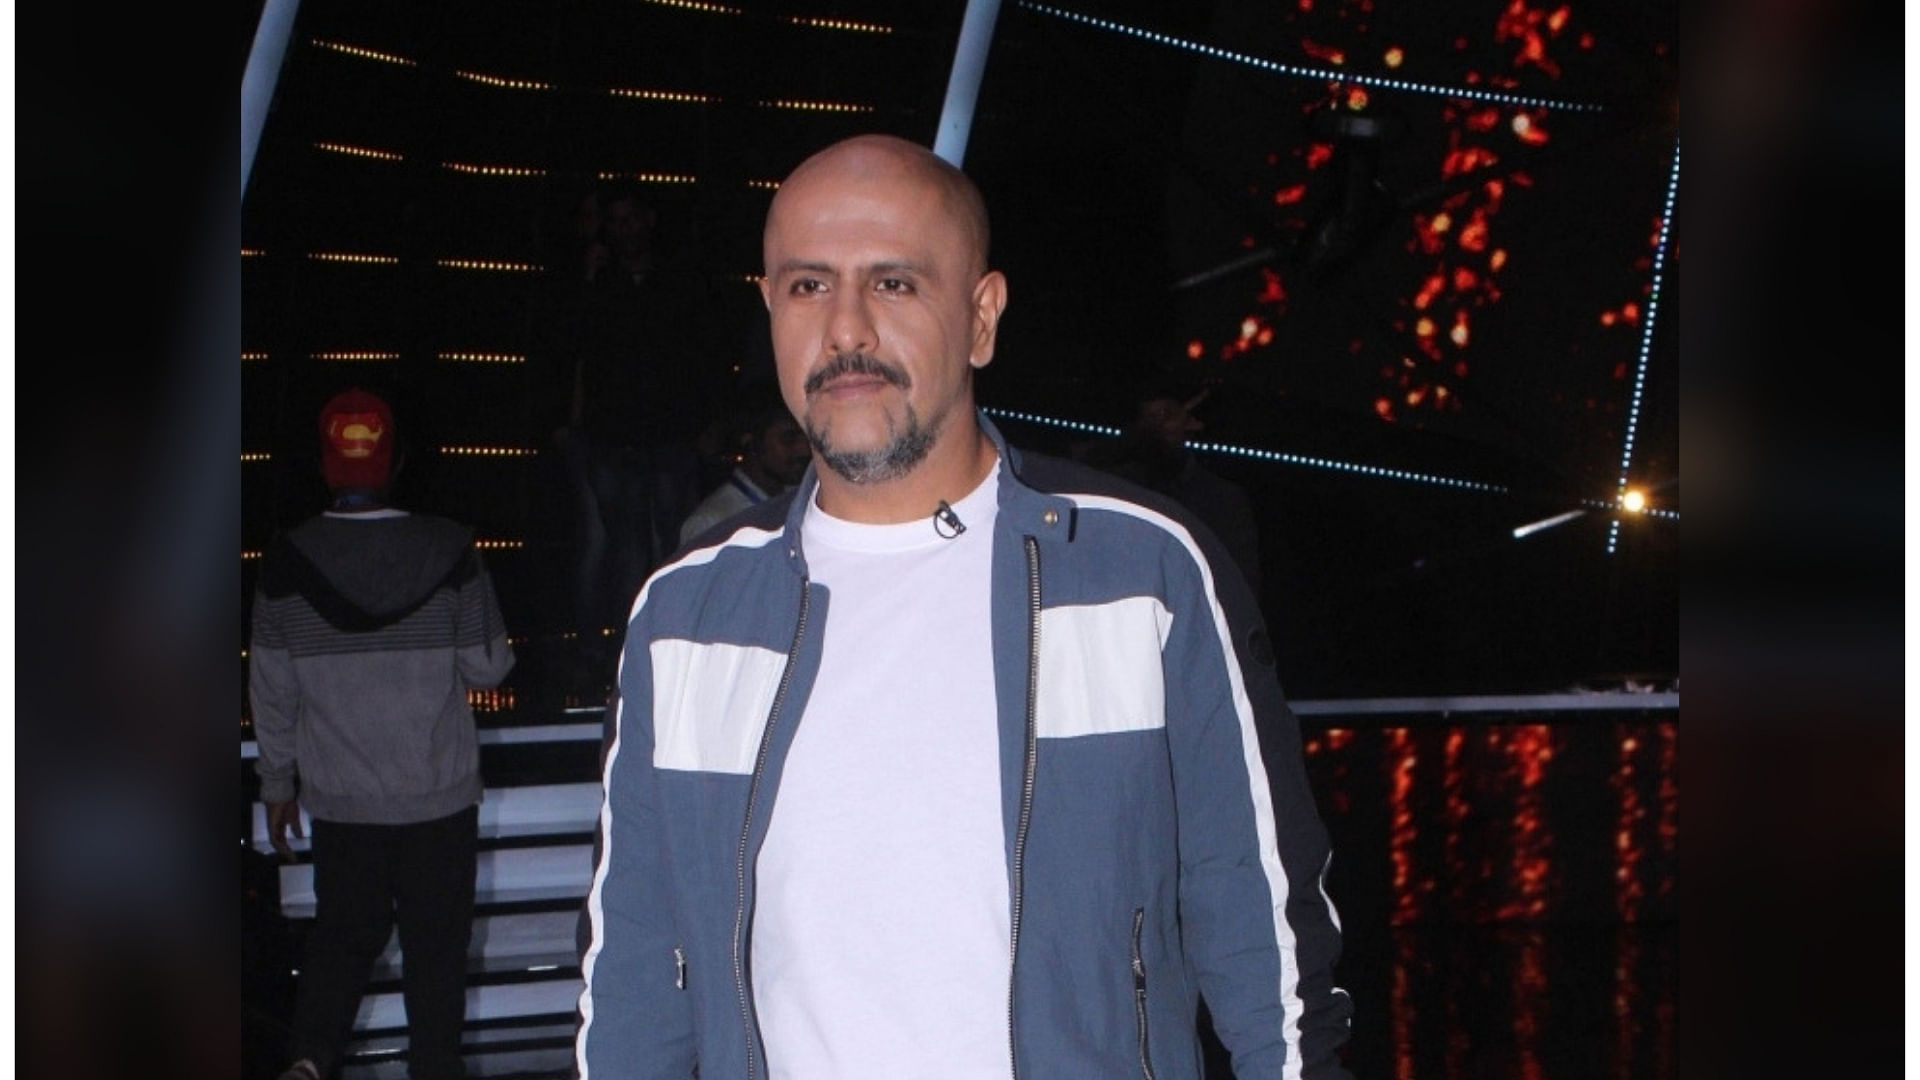 Vishal Dadlani calls out the EC for delaying the stalling of PM Modi’s biopic.